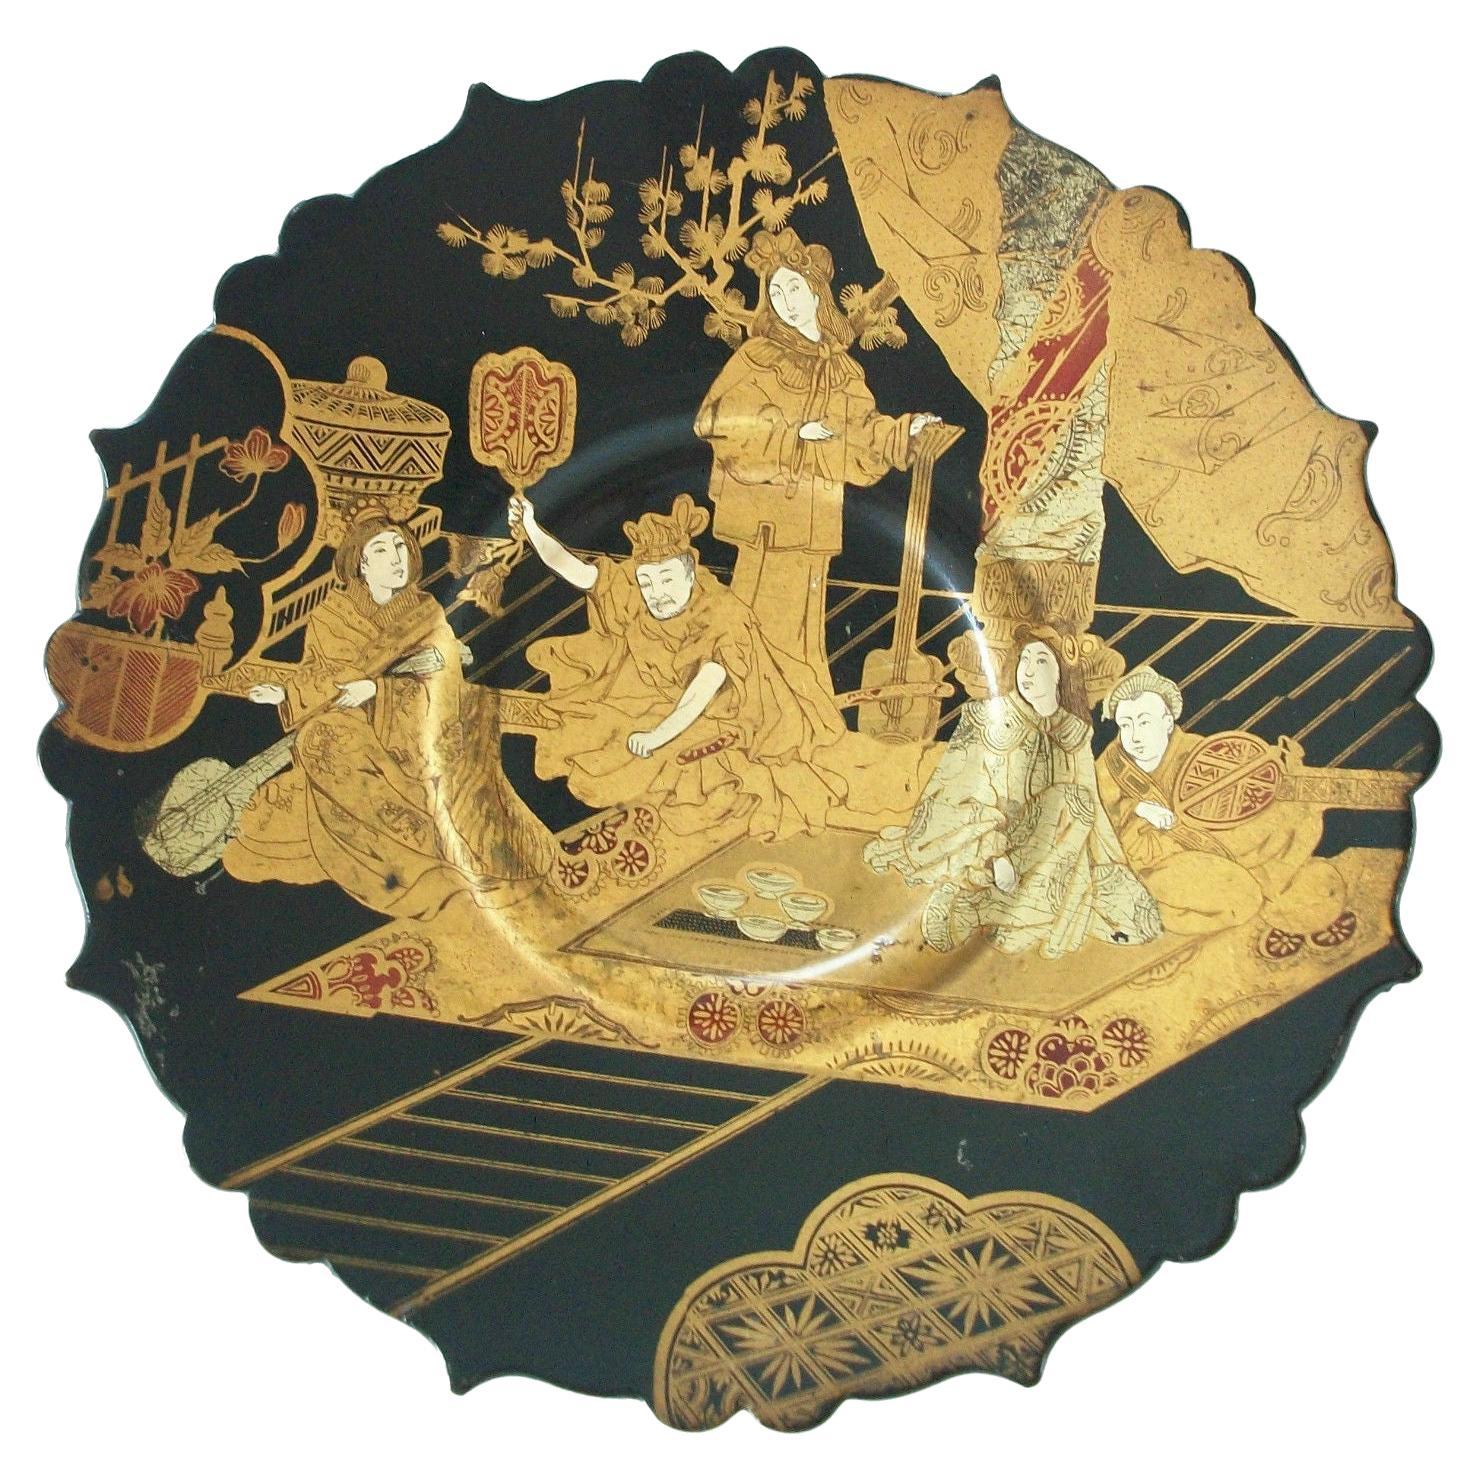 Orientalist Hand Painted & Gilt Black Lacquer Plate or Dish, 19th Century